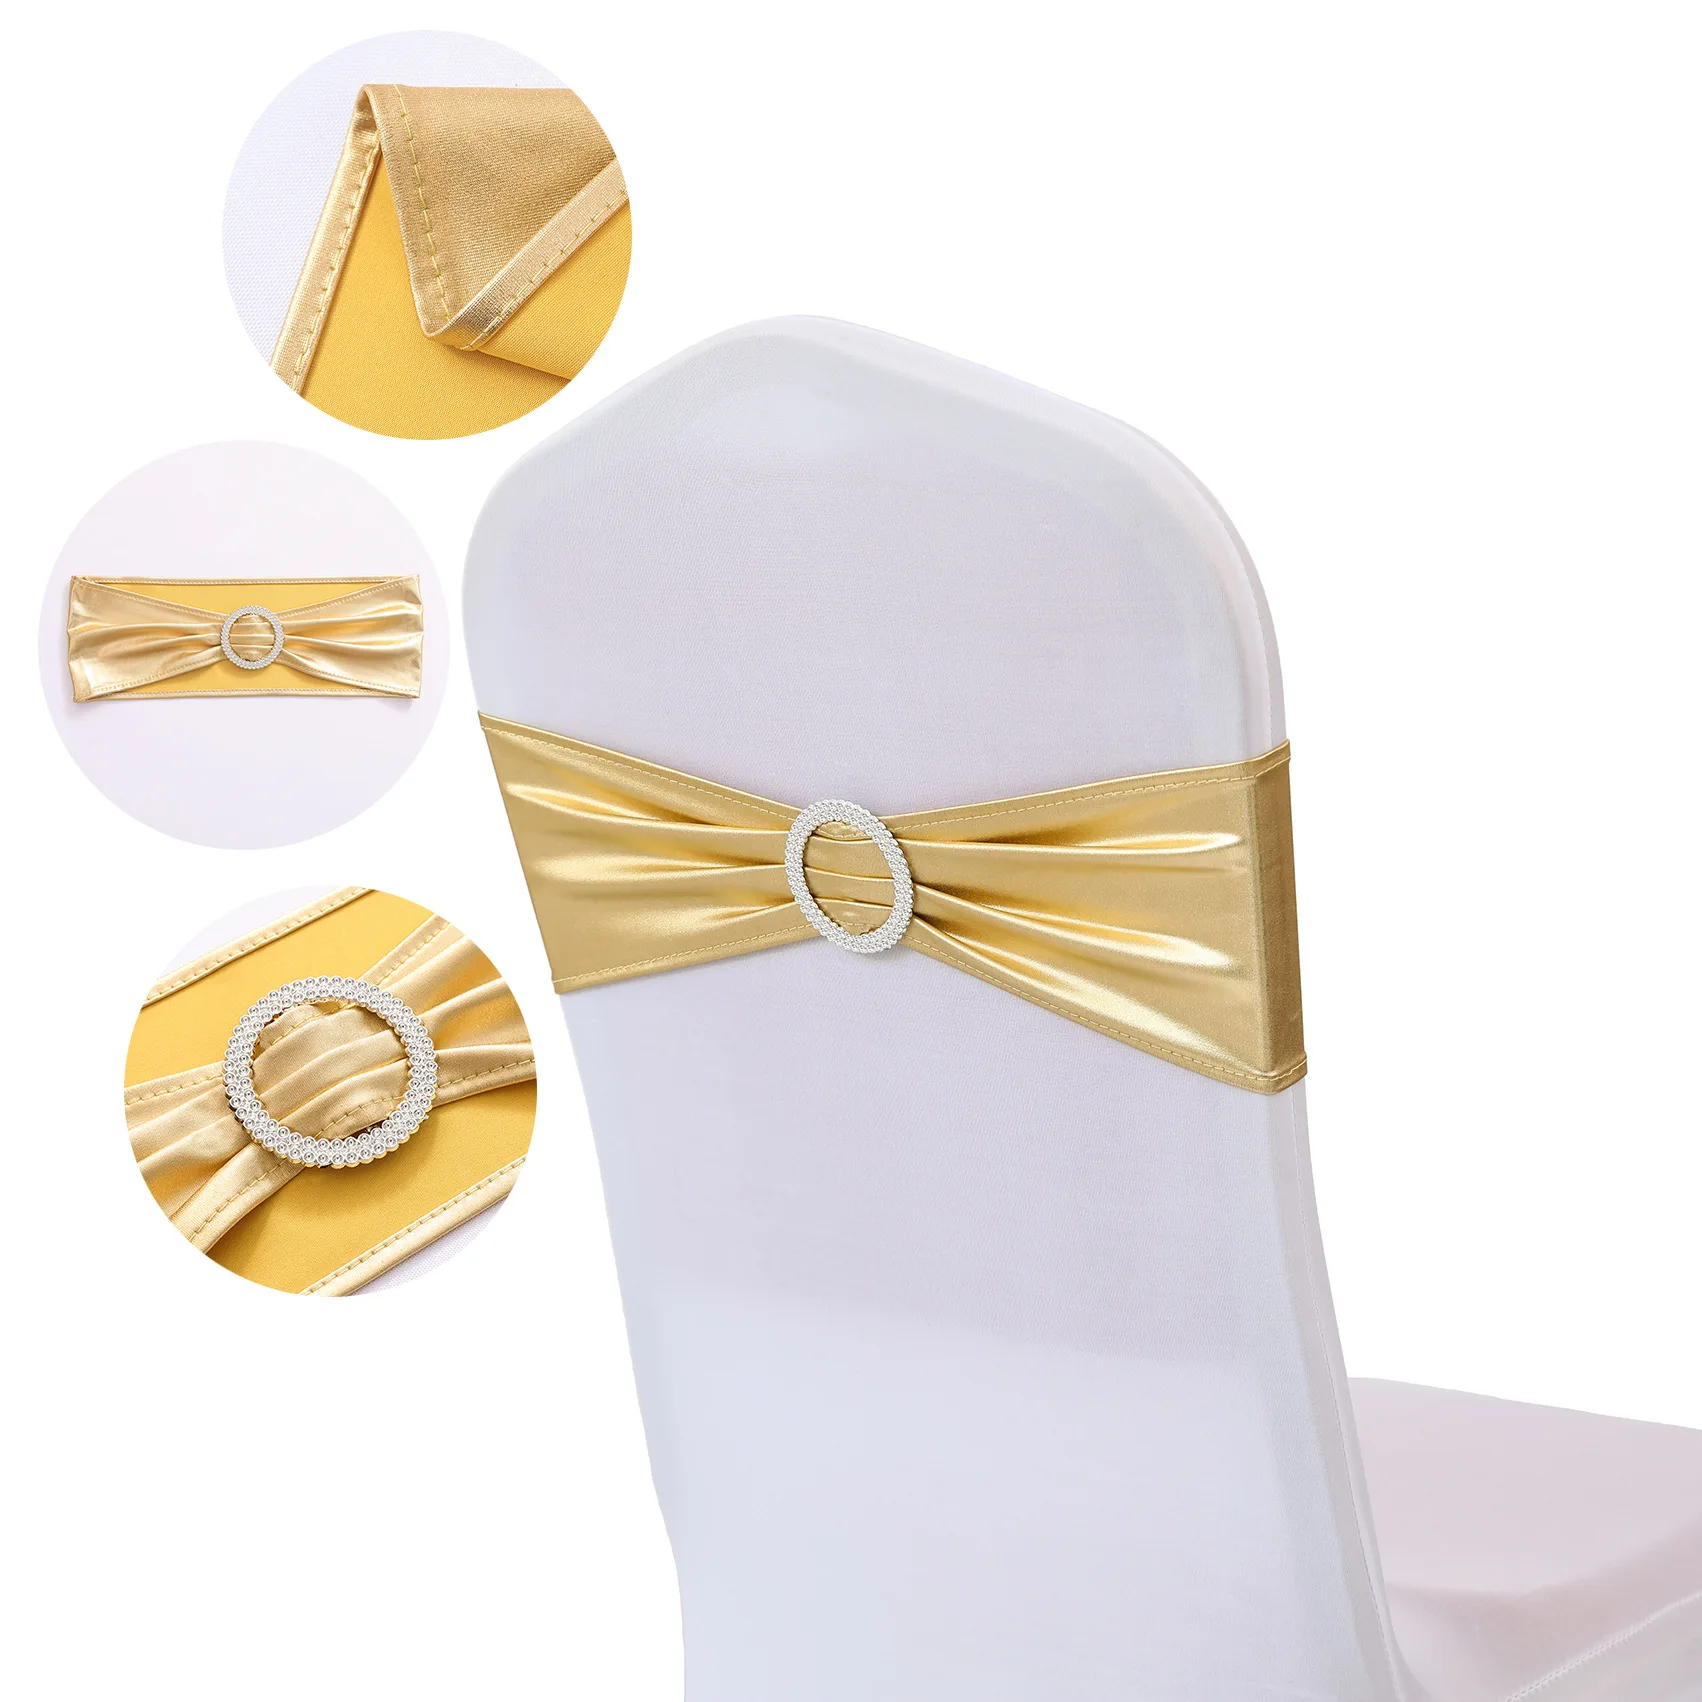 10pcs/50pcs Metallic Gold Silver Stretch Spandex Chair Bow Sash Band With Round Buckle For Banquet Event Wedding Chair Sash Tie